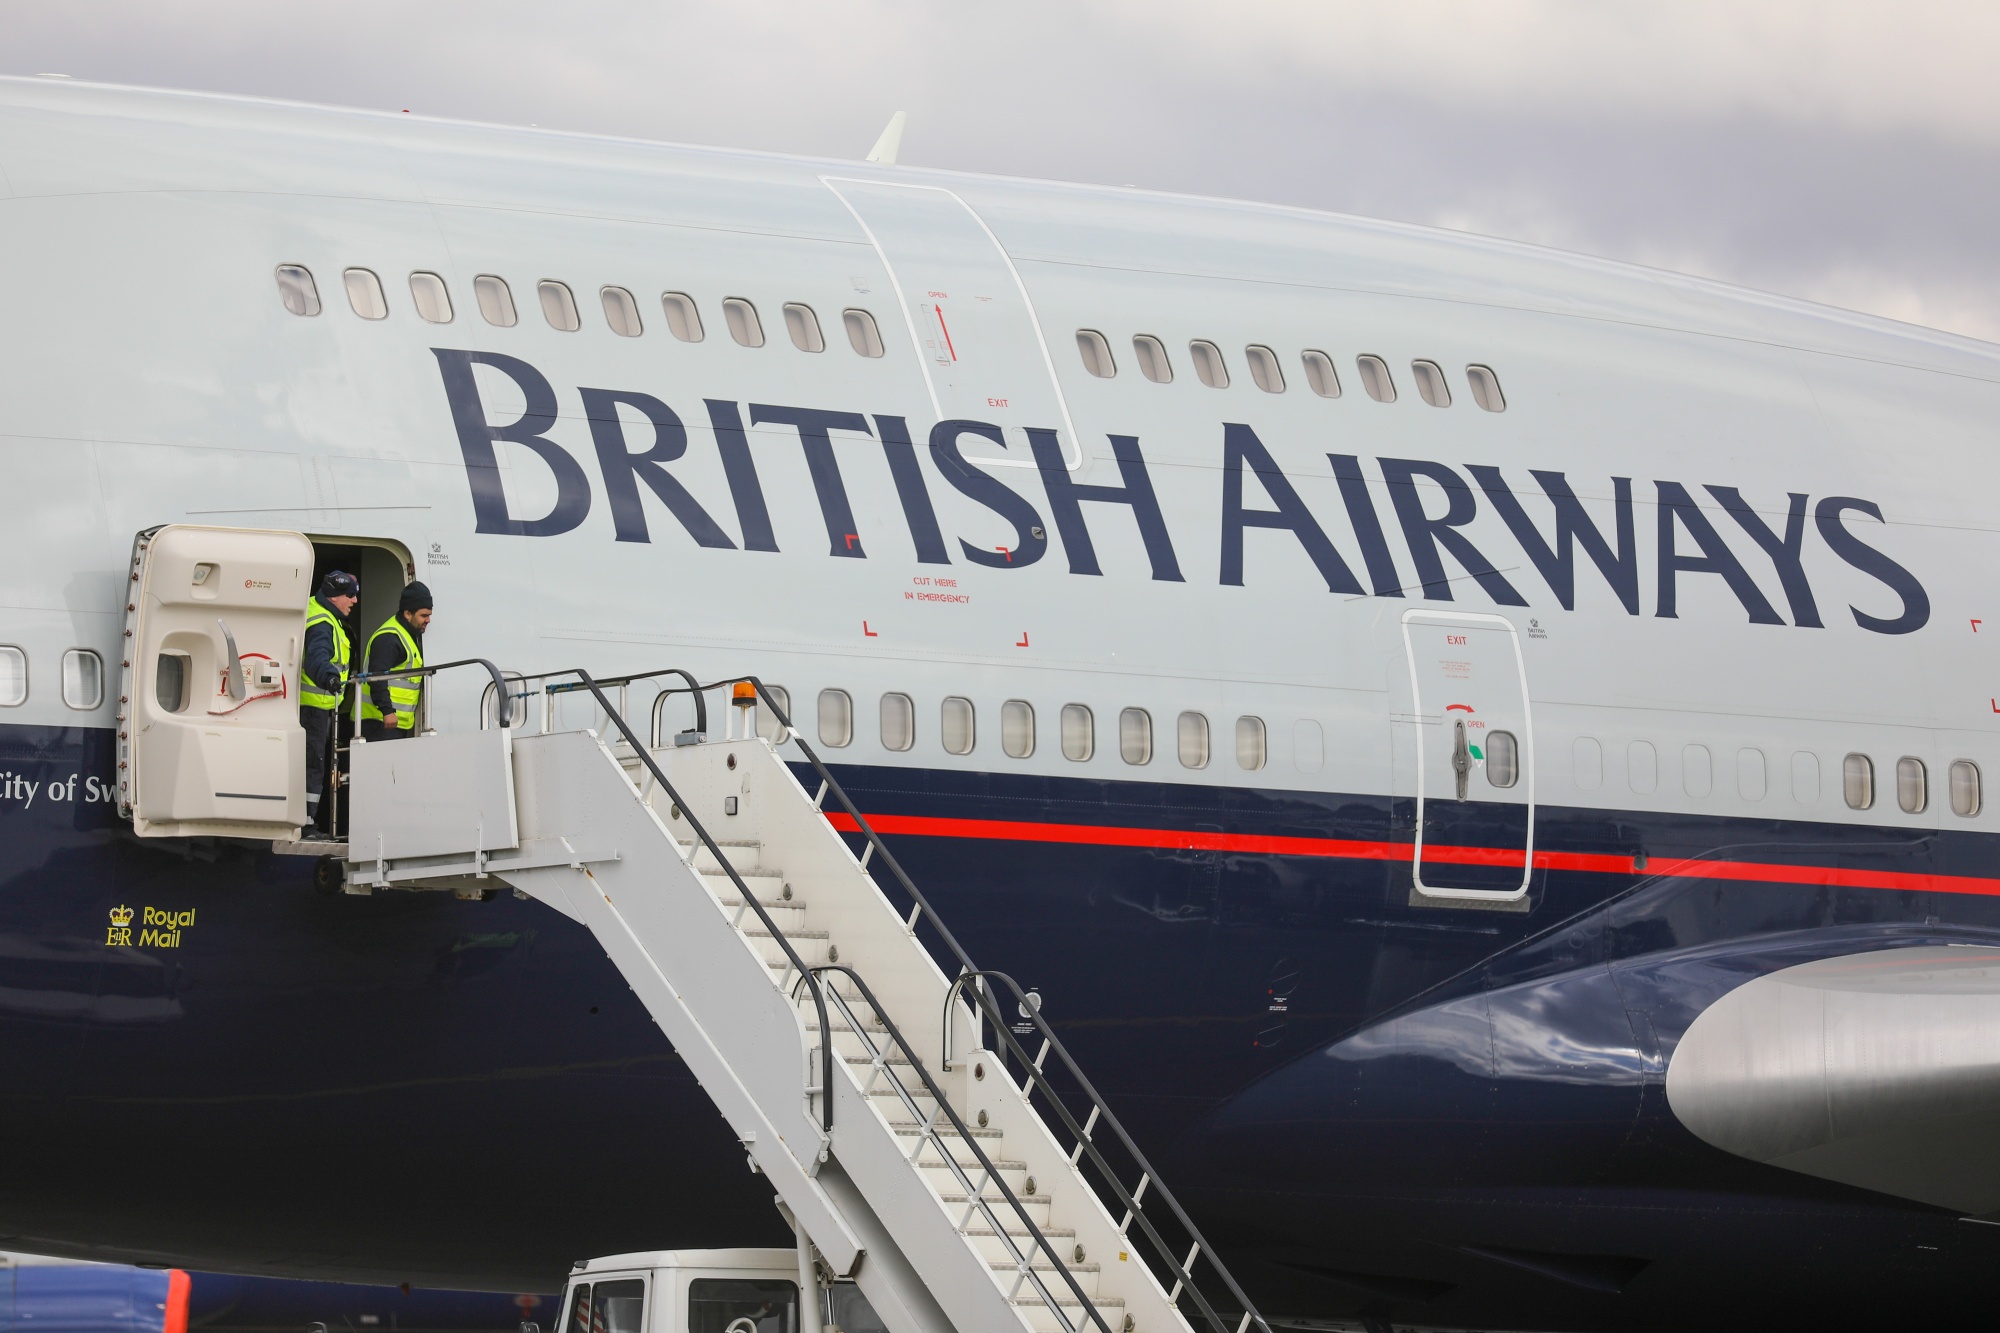 Crew members prepare an air stair for a British Airways&nbsp;aircraft&nbsp;at Bournemouth Airport in Bournemouth.